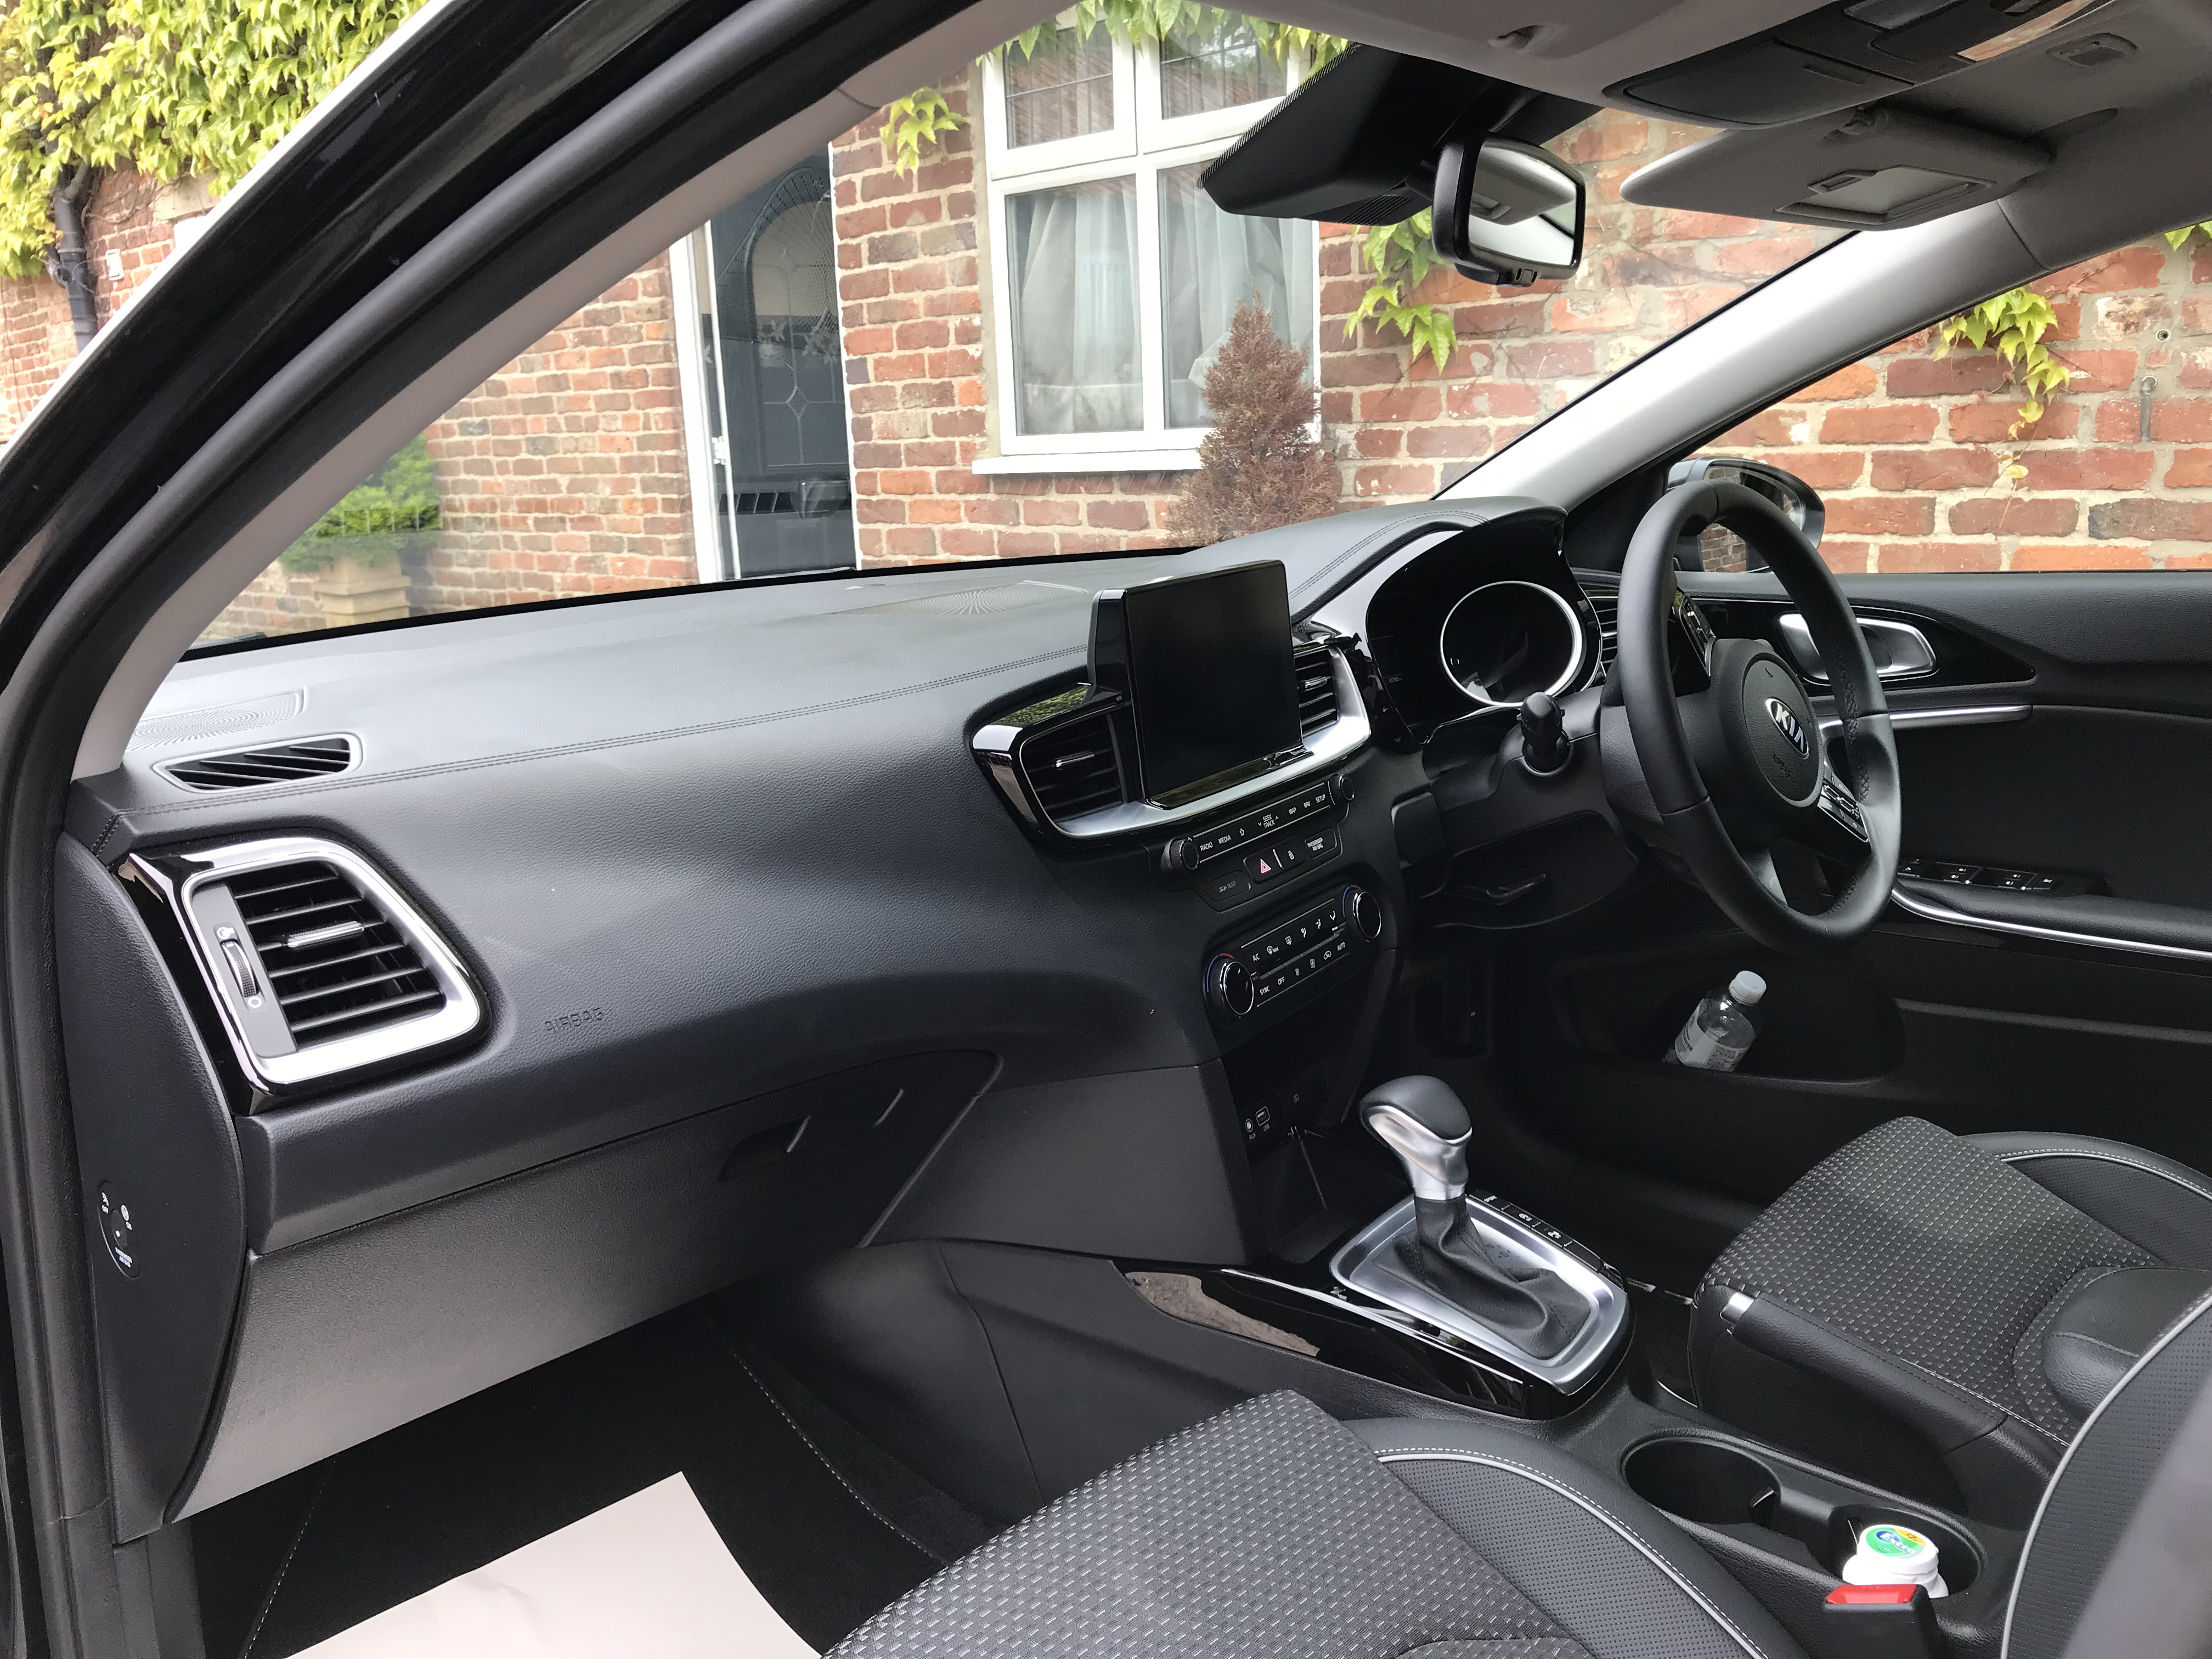 The Ceed's interior is solid and well-finished